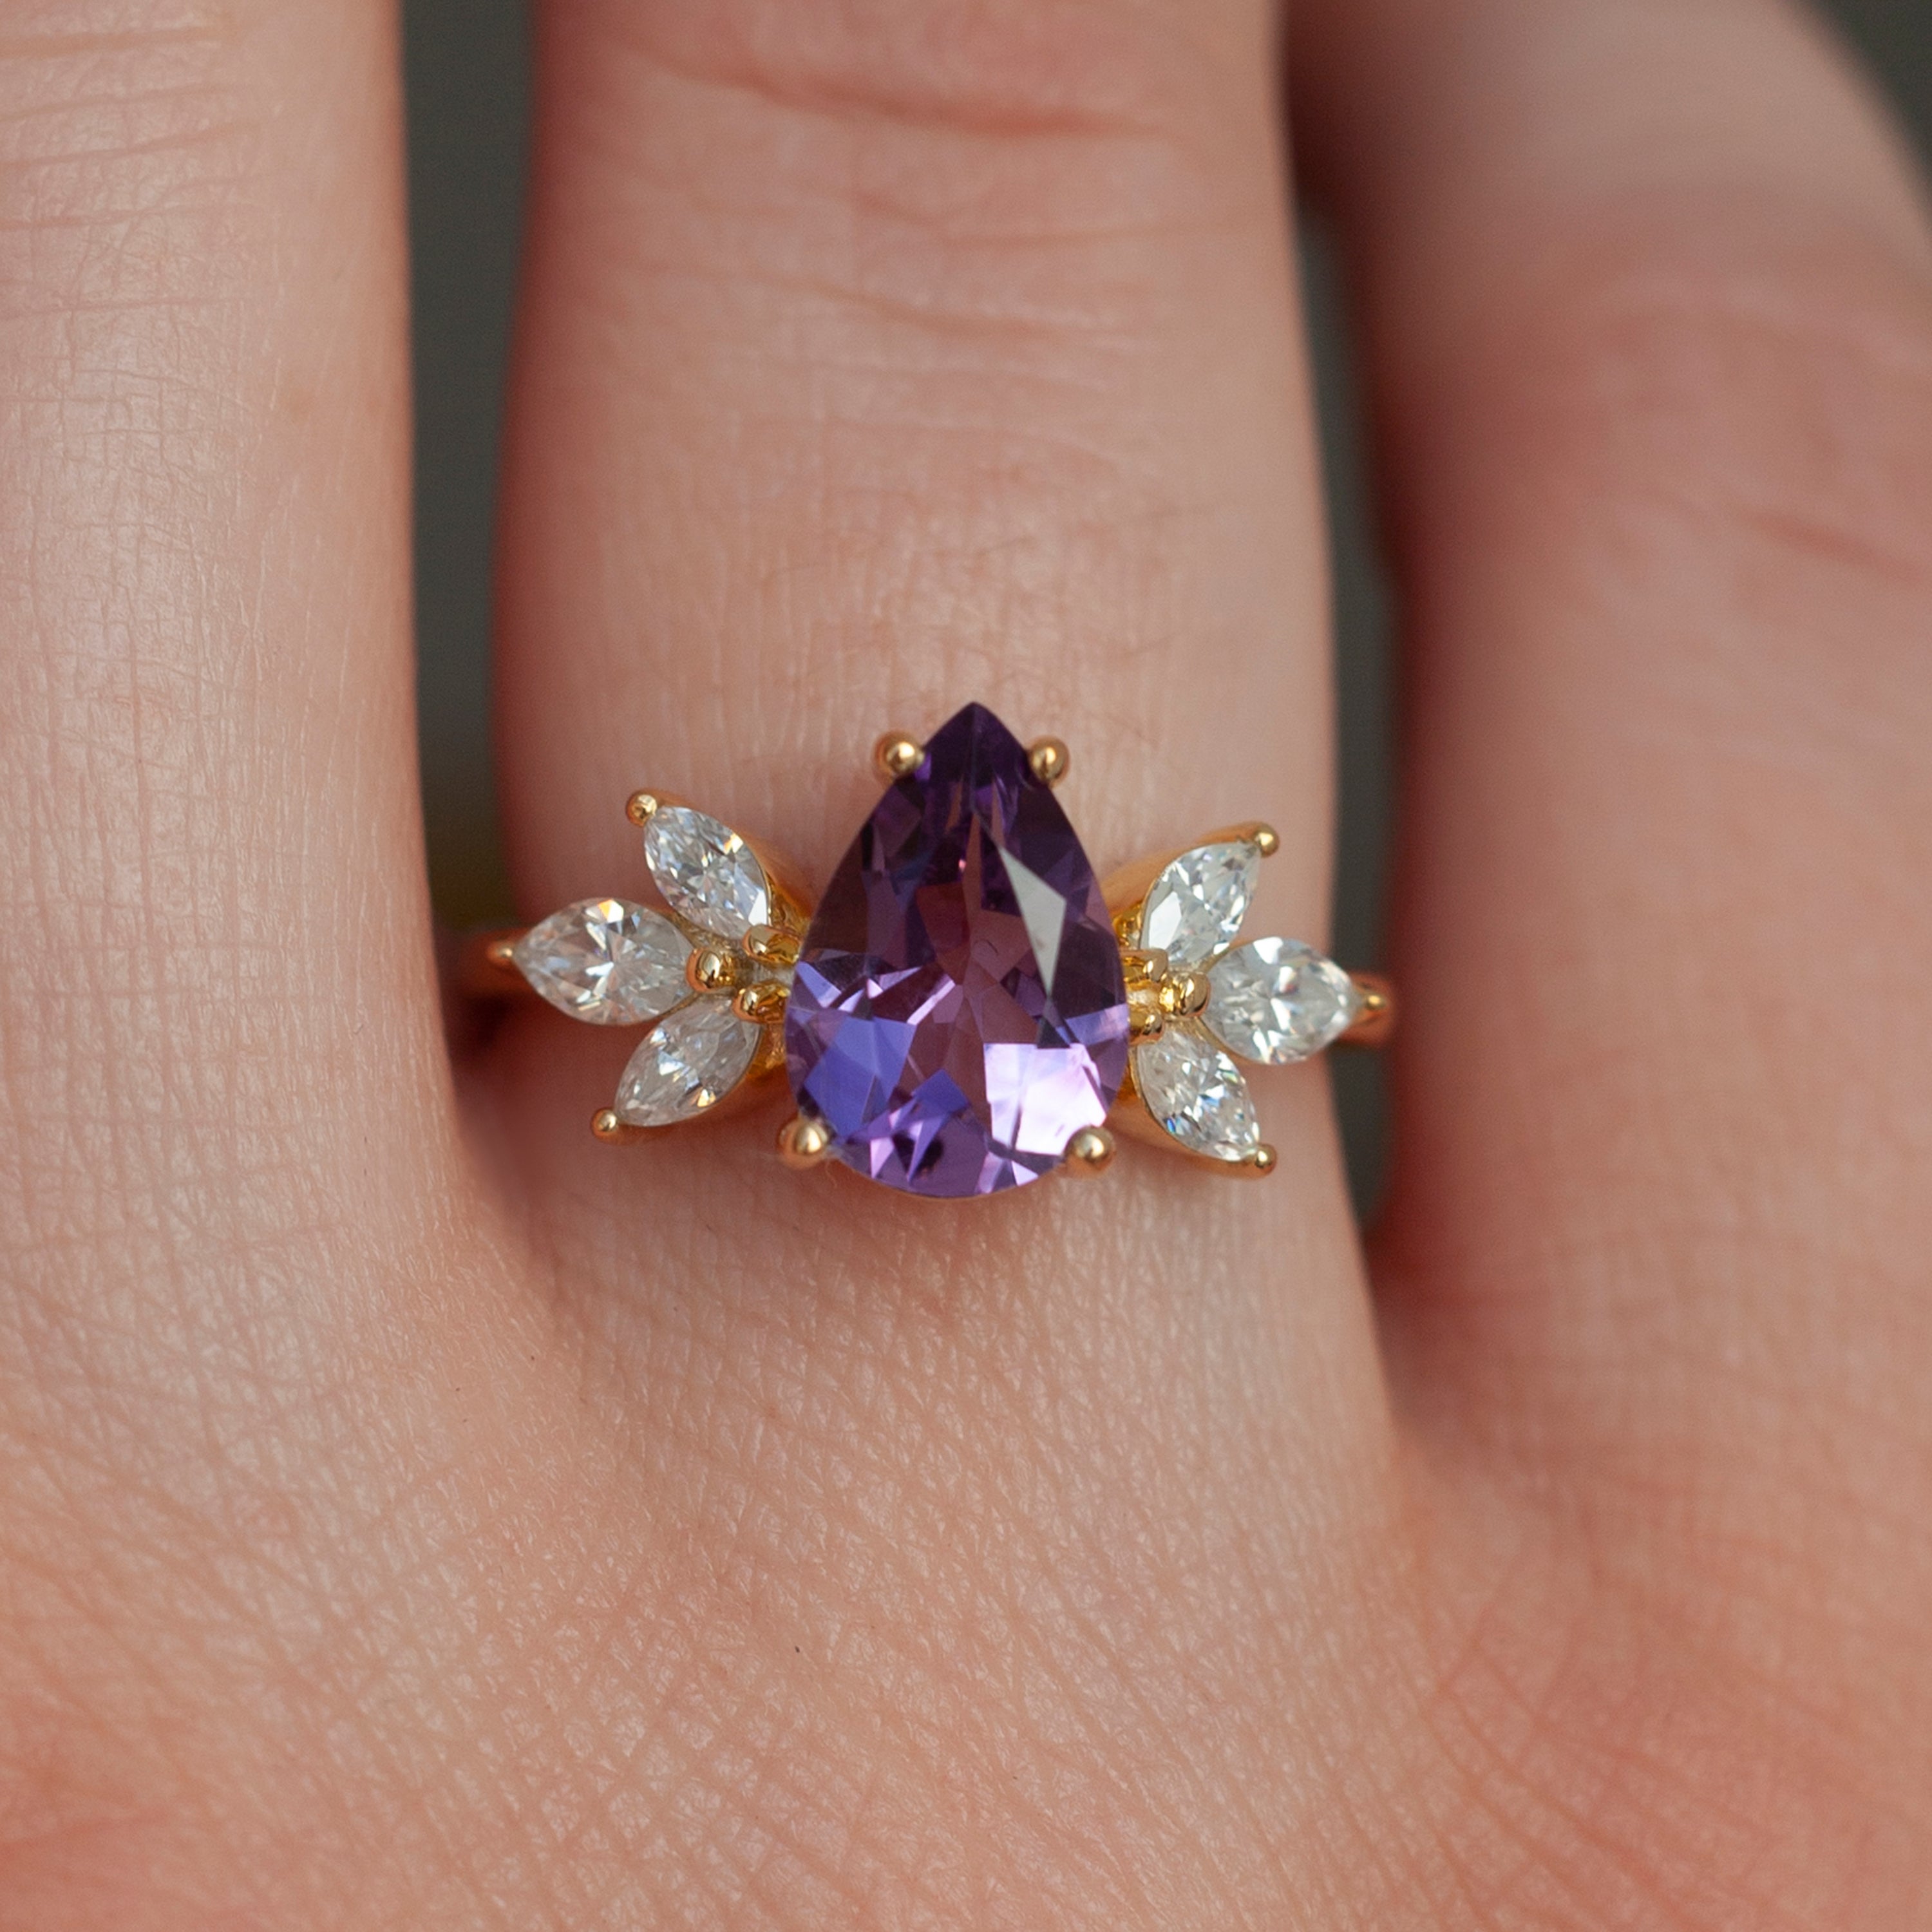 Monica Pear Amethyst Ring with Petal Marquise Moissanite